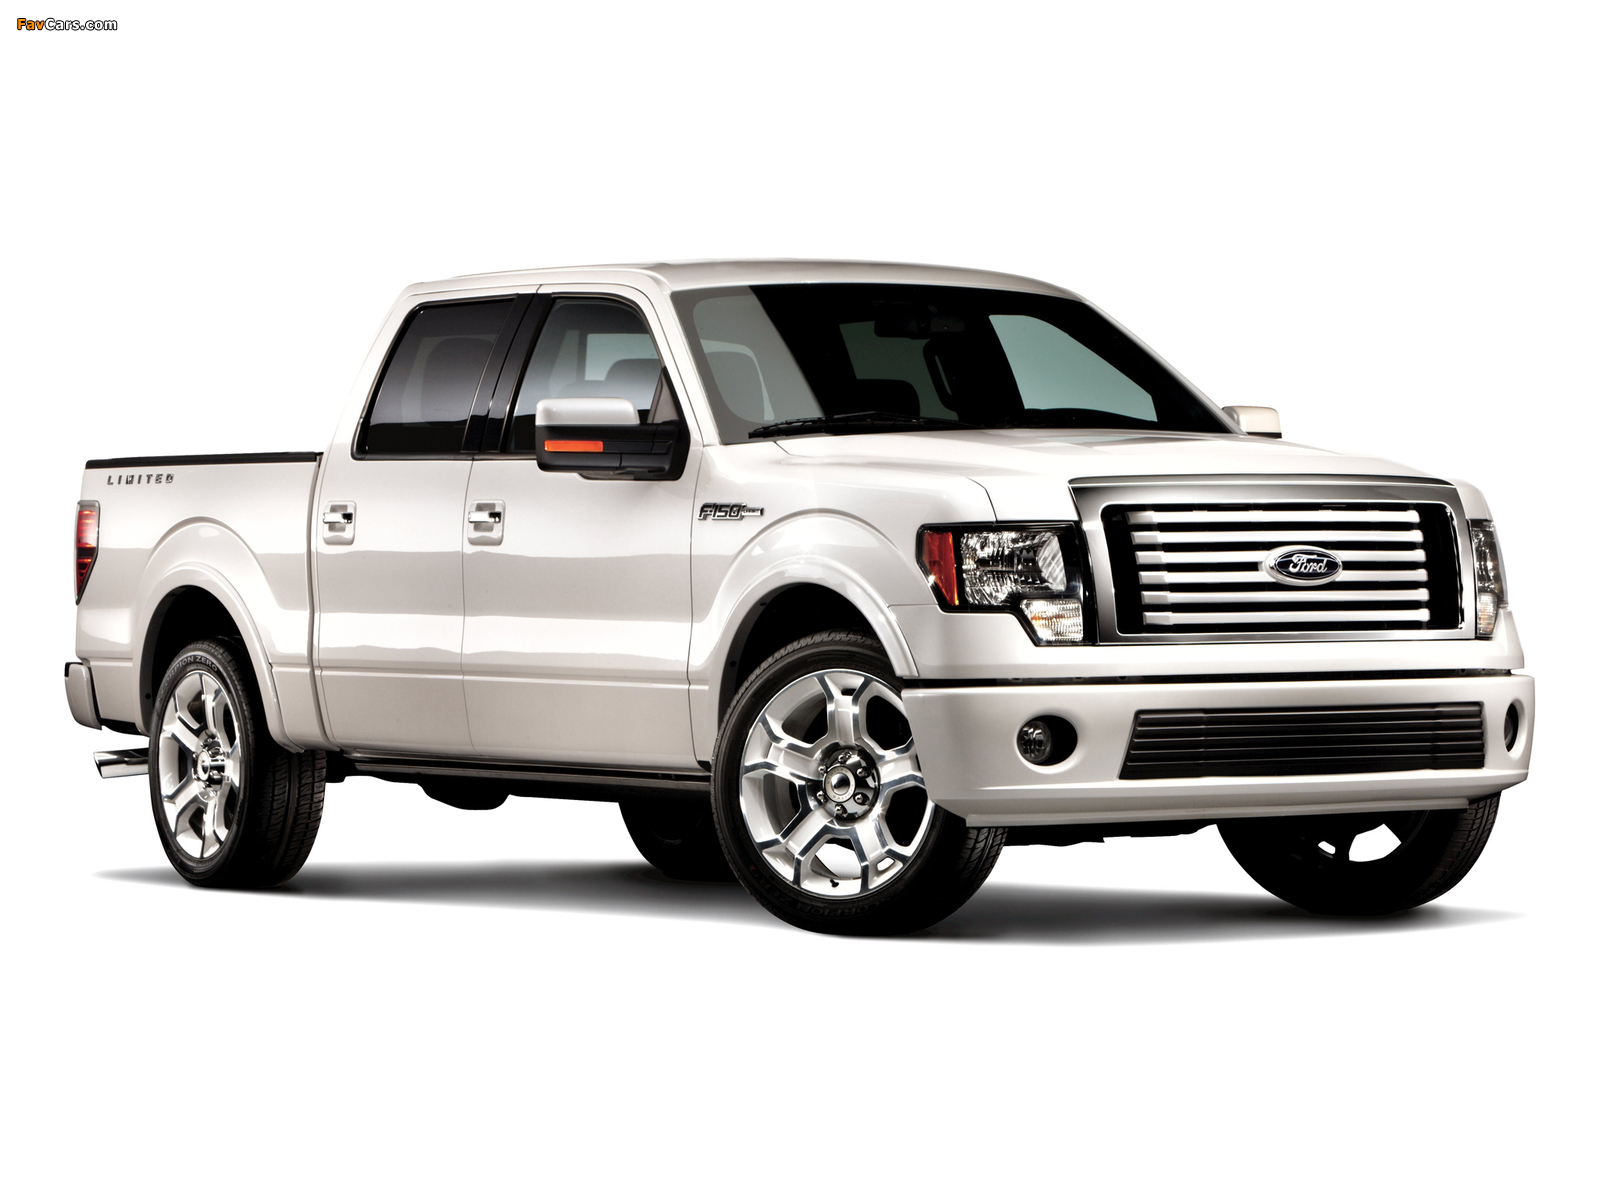 Ford F-150 Lariat Limited 2010 pictures (1600 x 1200)